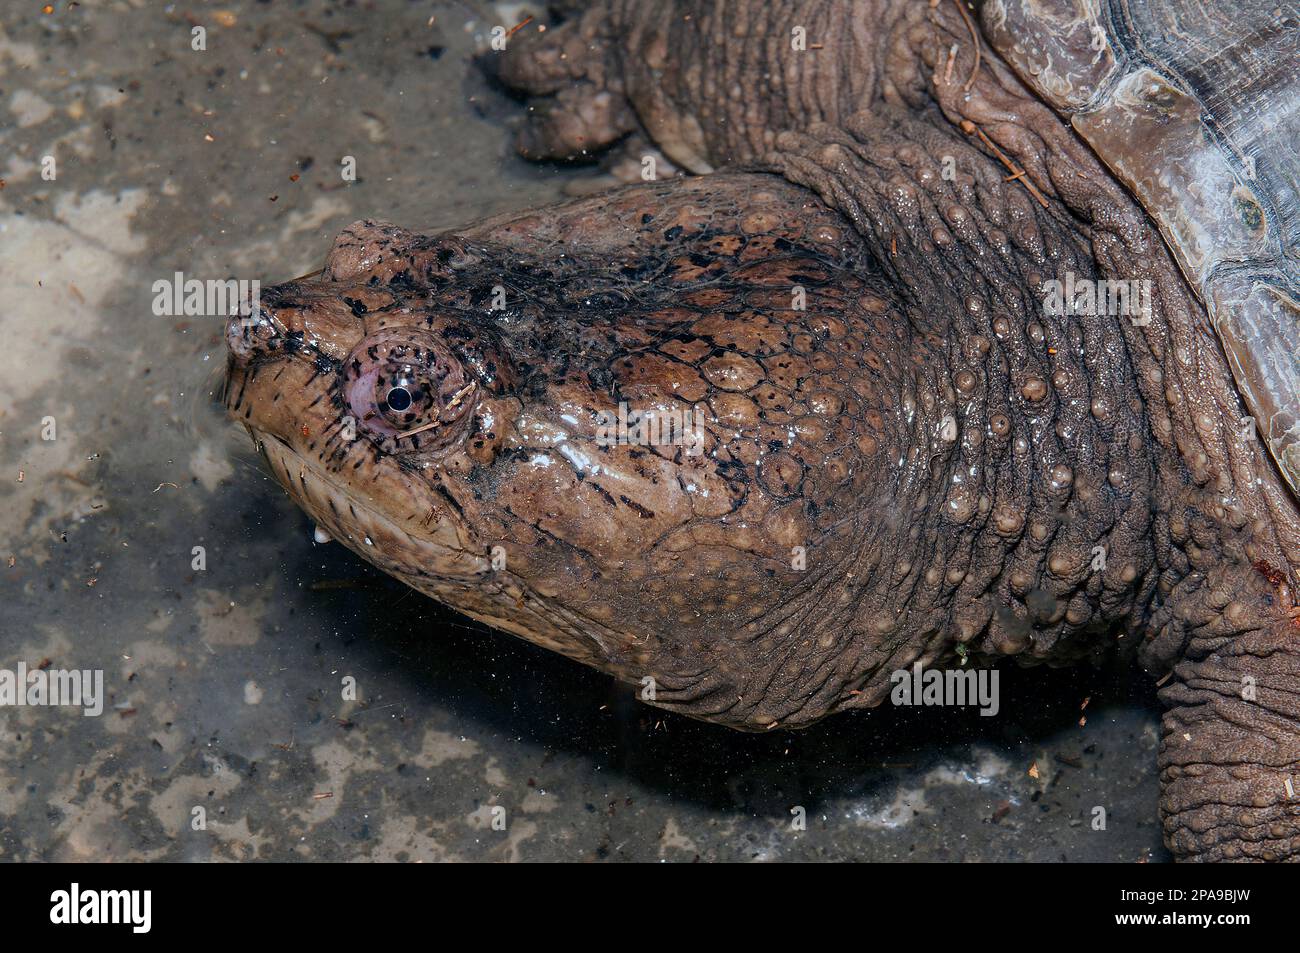 Snapping turtle, close-up of head and shoulders facing left. Stock Photo